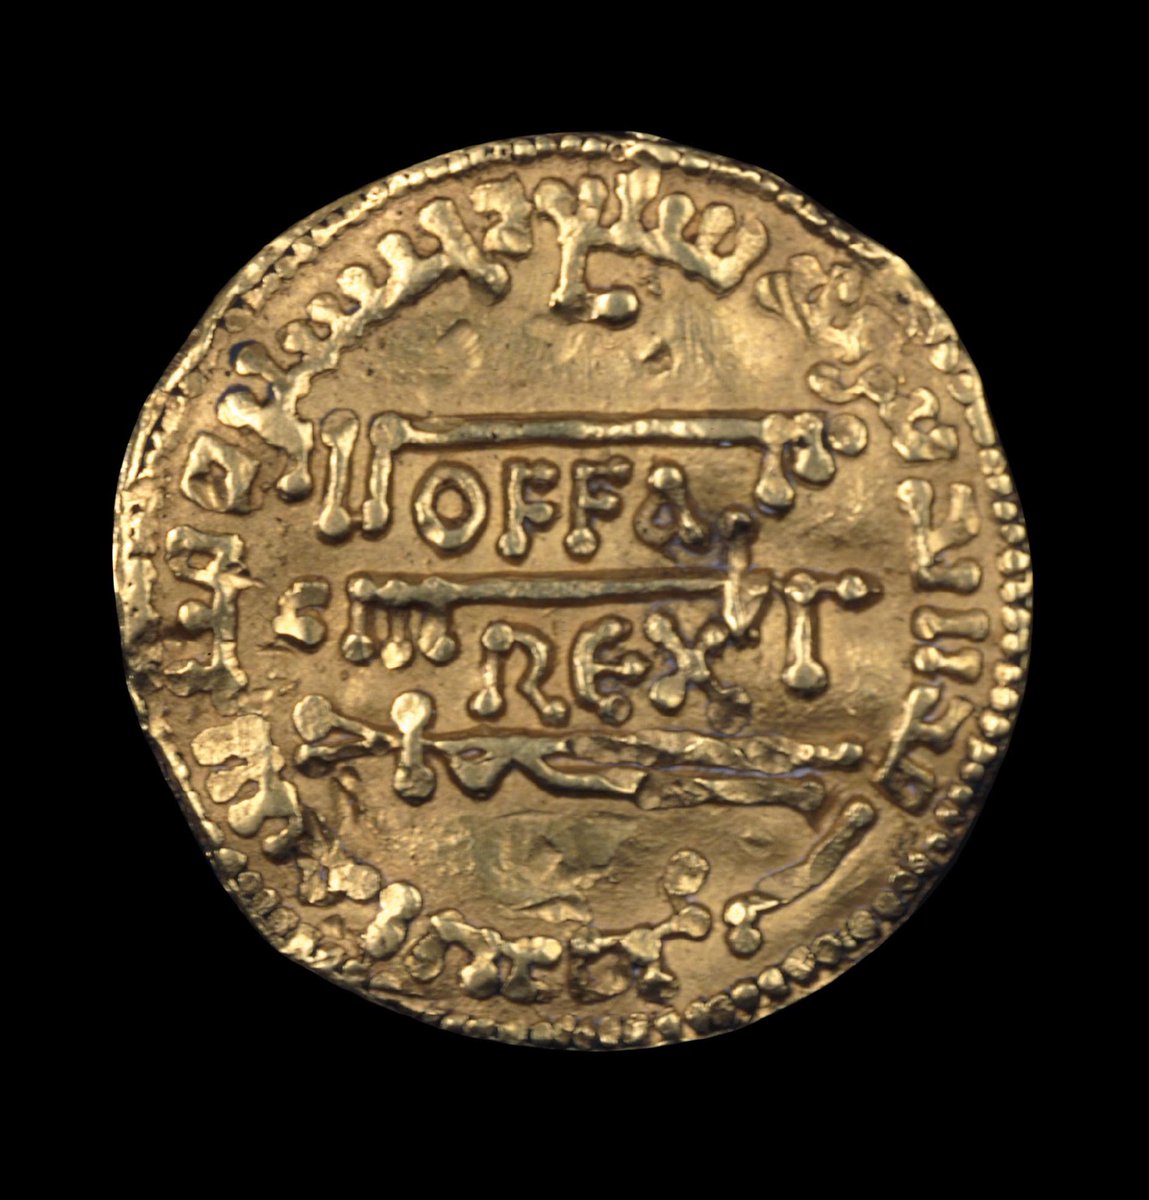 Putting your name on money transfers to buttress or appropriate authority in times of crisis is very much a Medieval Thingᵀᴹ. Offa gave the pope dinars signed with his name to get some of the great standing of Arabic coinage. It's an old trick.